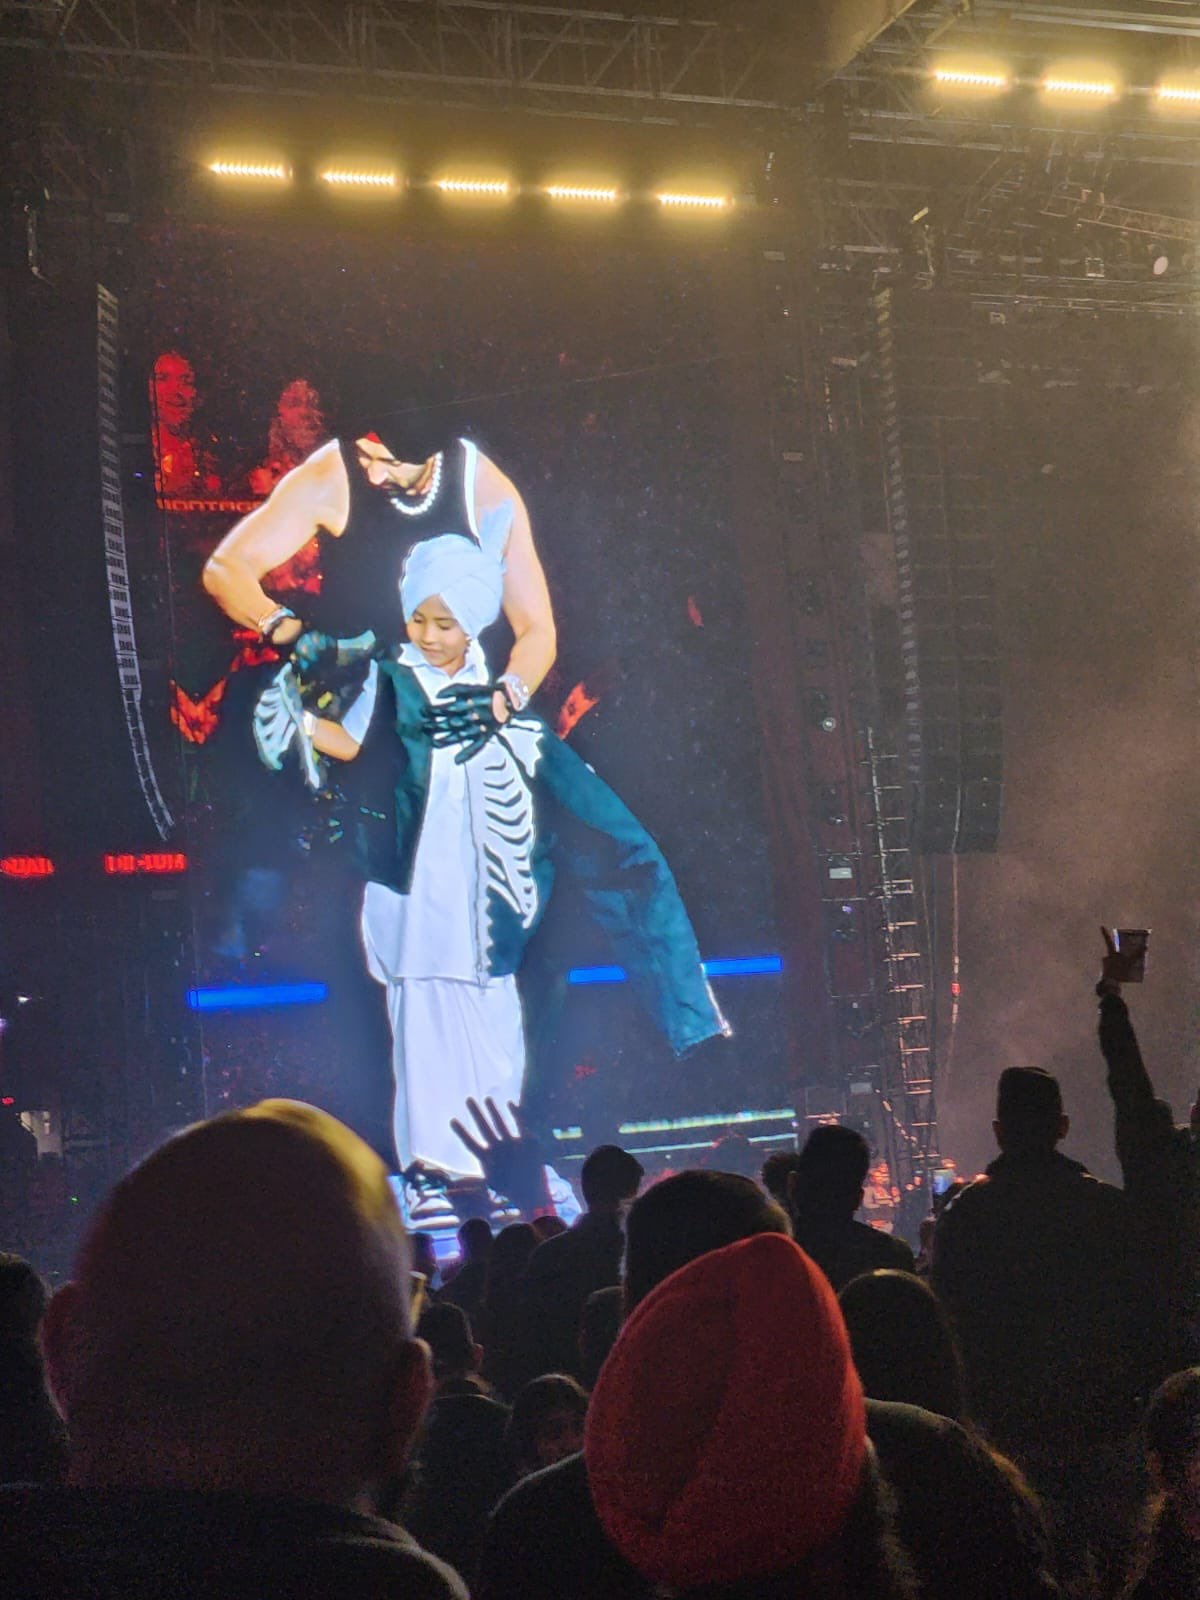 ‘Dream come true’: 6-year-old Diljit Dosanjh superfan dances onstage with his idol